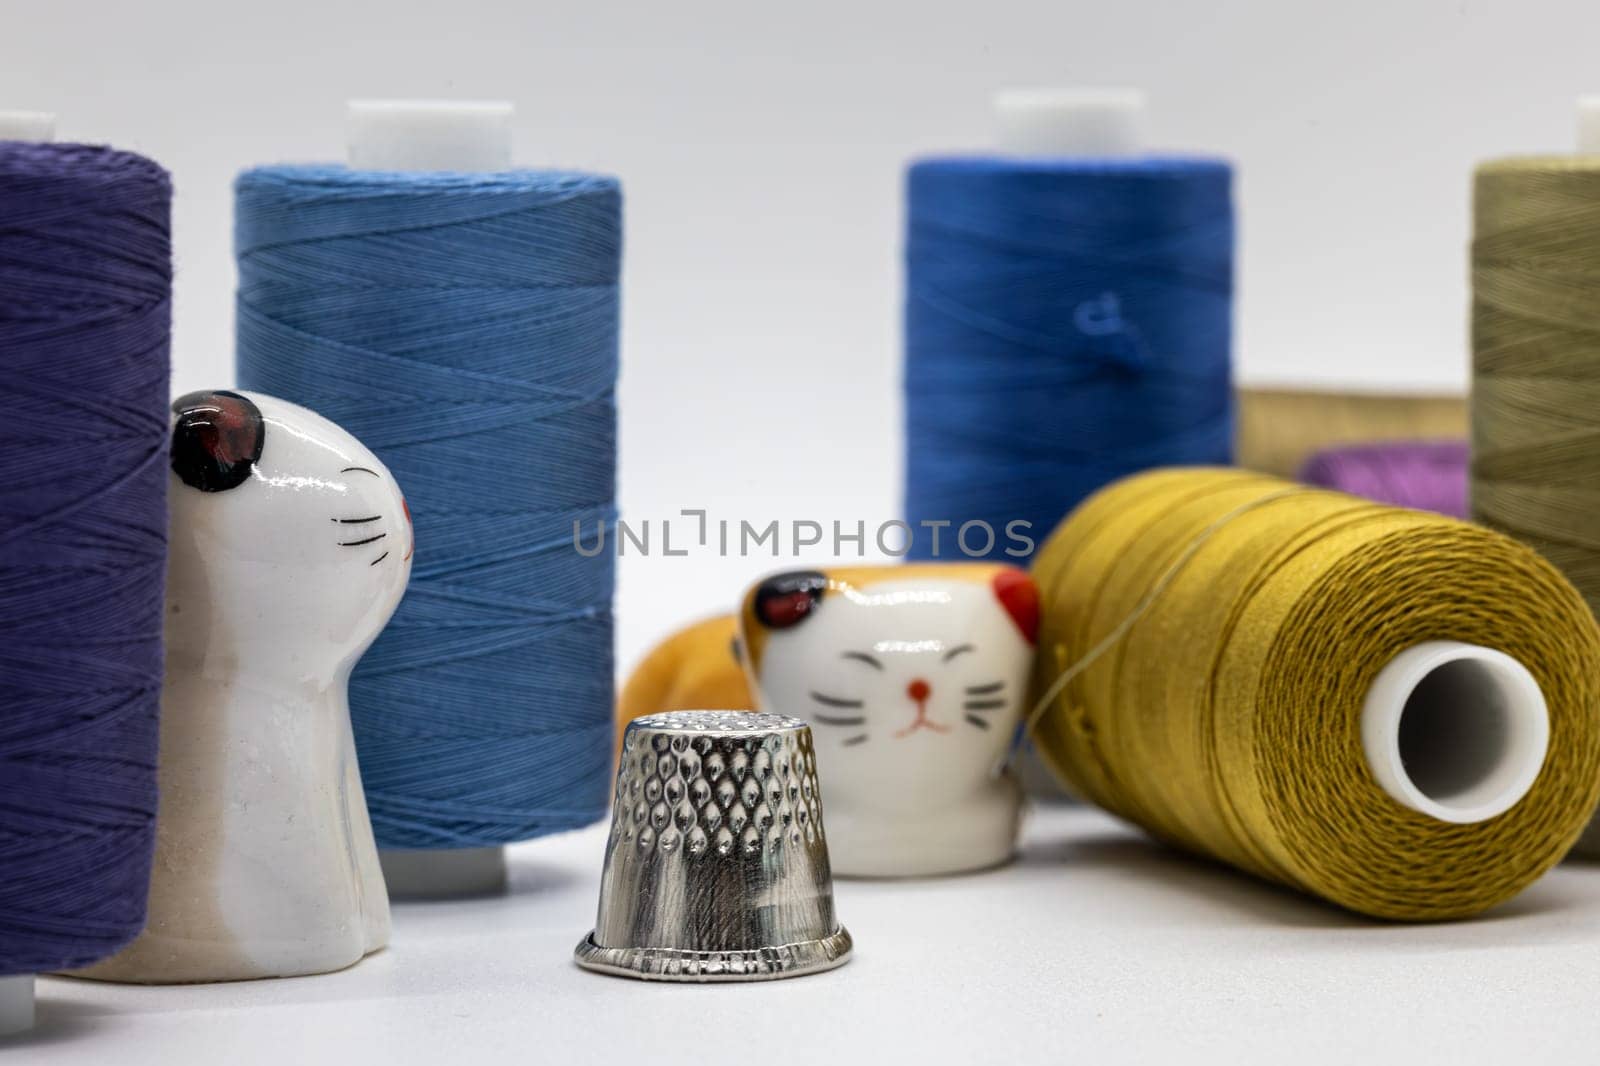 Assorted sewing threads with whimsical cat figurines and metal thimble